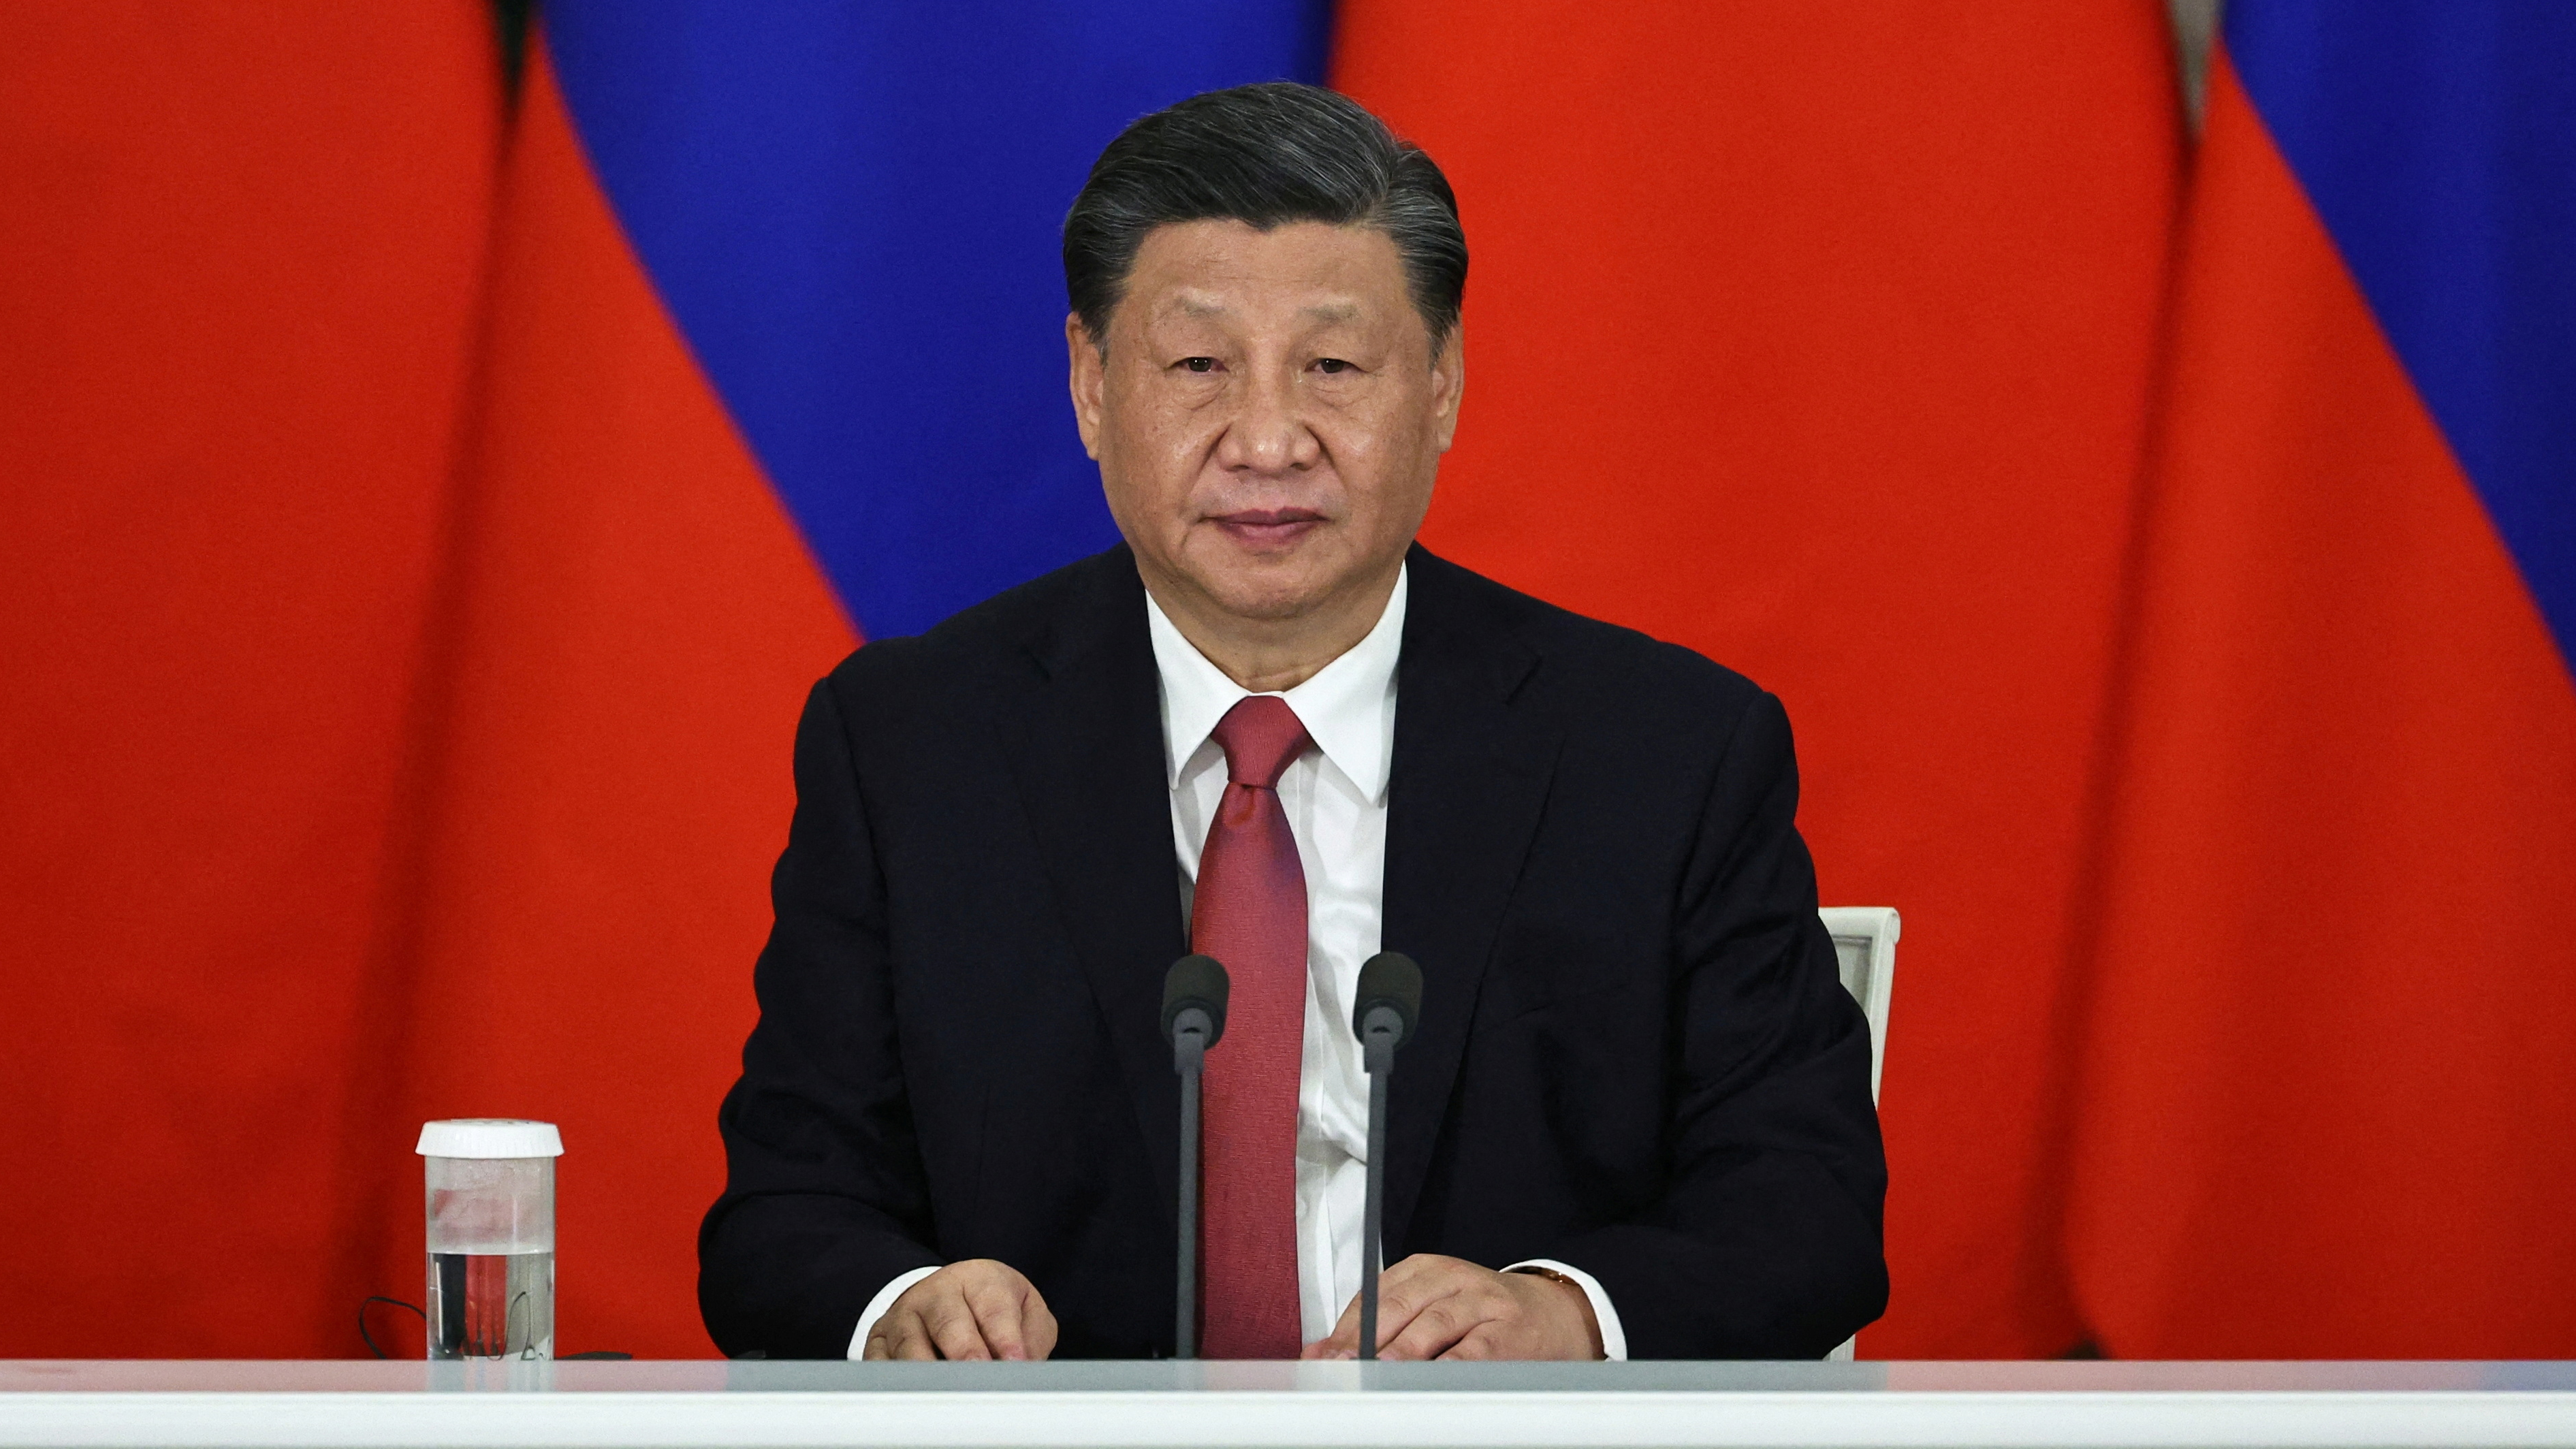 China's President spent three days in Russia discussing a range of issues with Vladimir Putin./Sputnik via Reuters